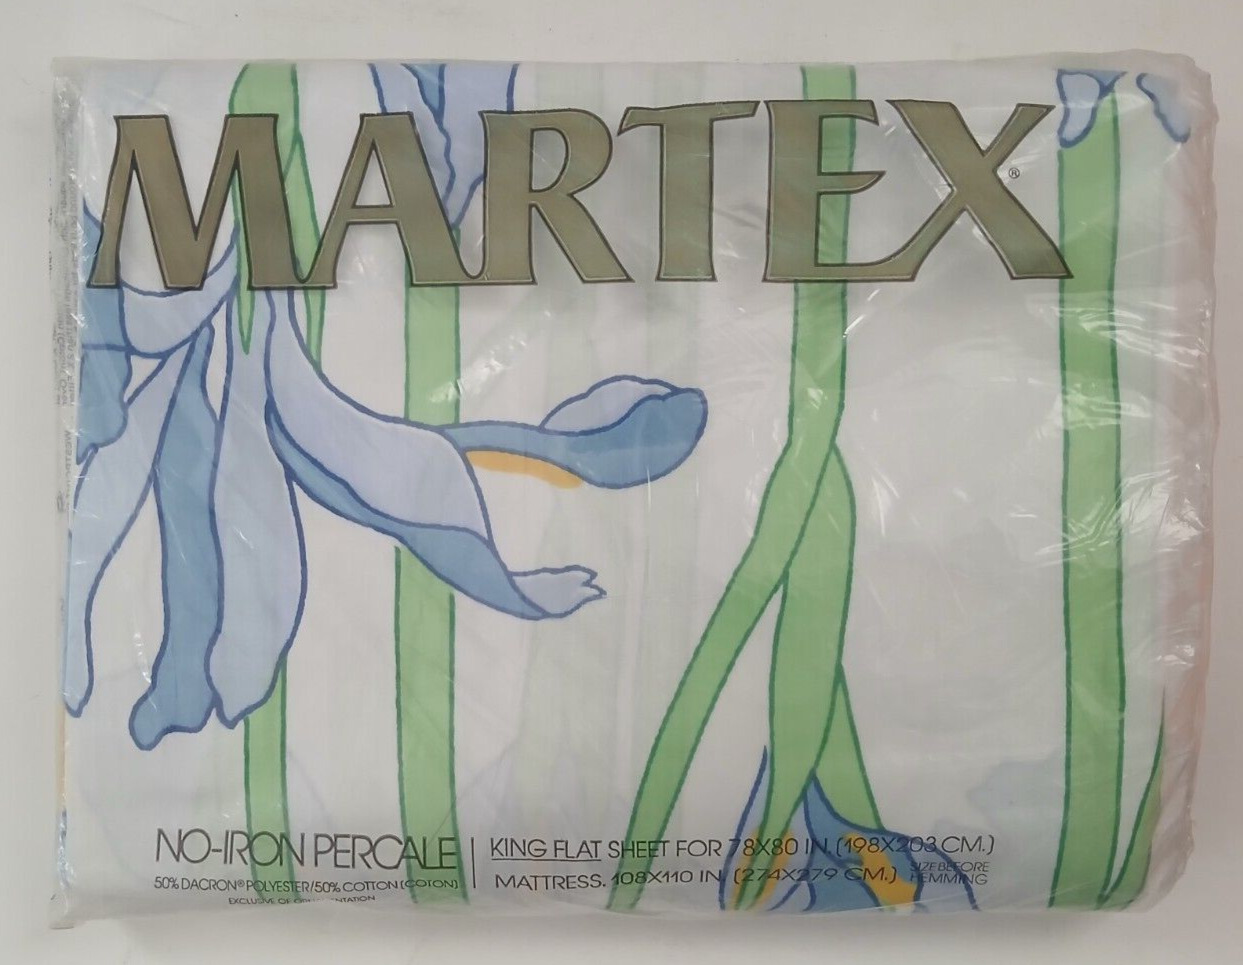 Vintage Martex King Flat Sheet - NOS Floral White Percale USA Made